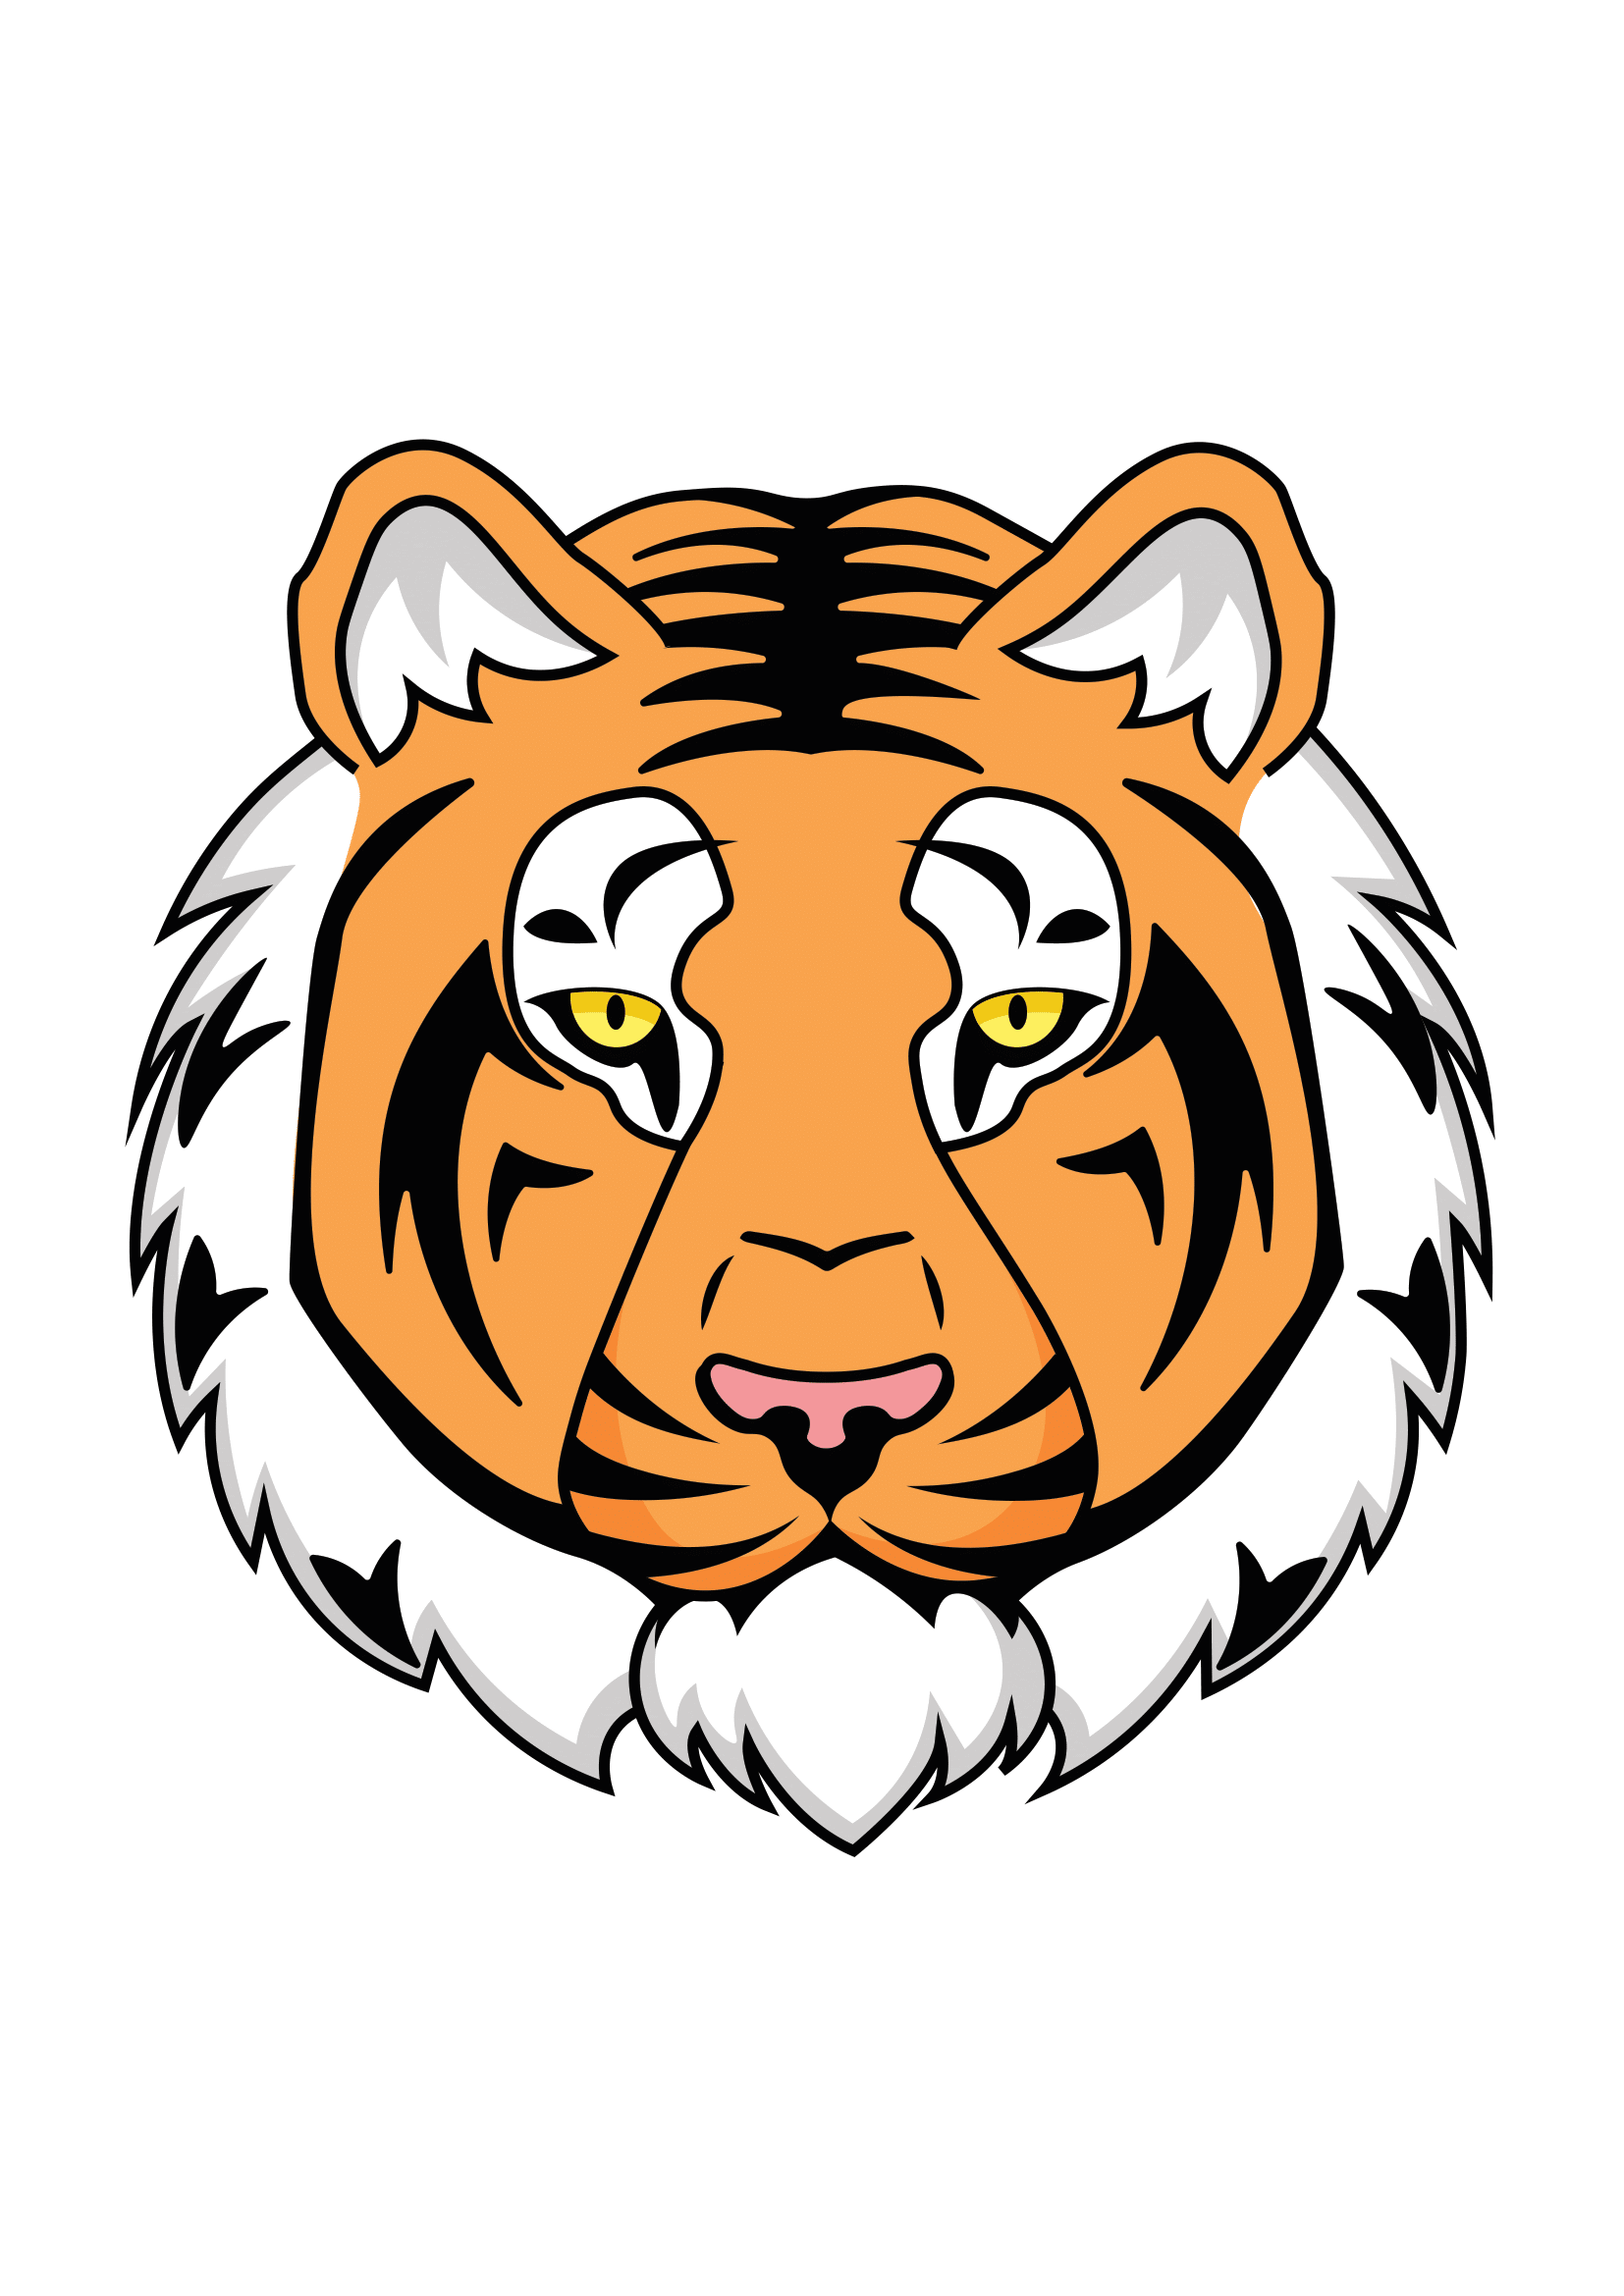 How to Draw A Tiger Face Step by Step Printable